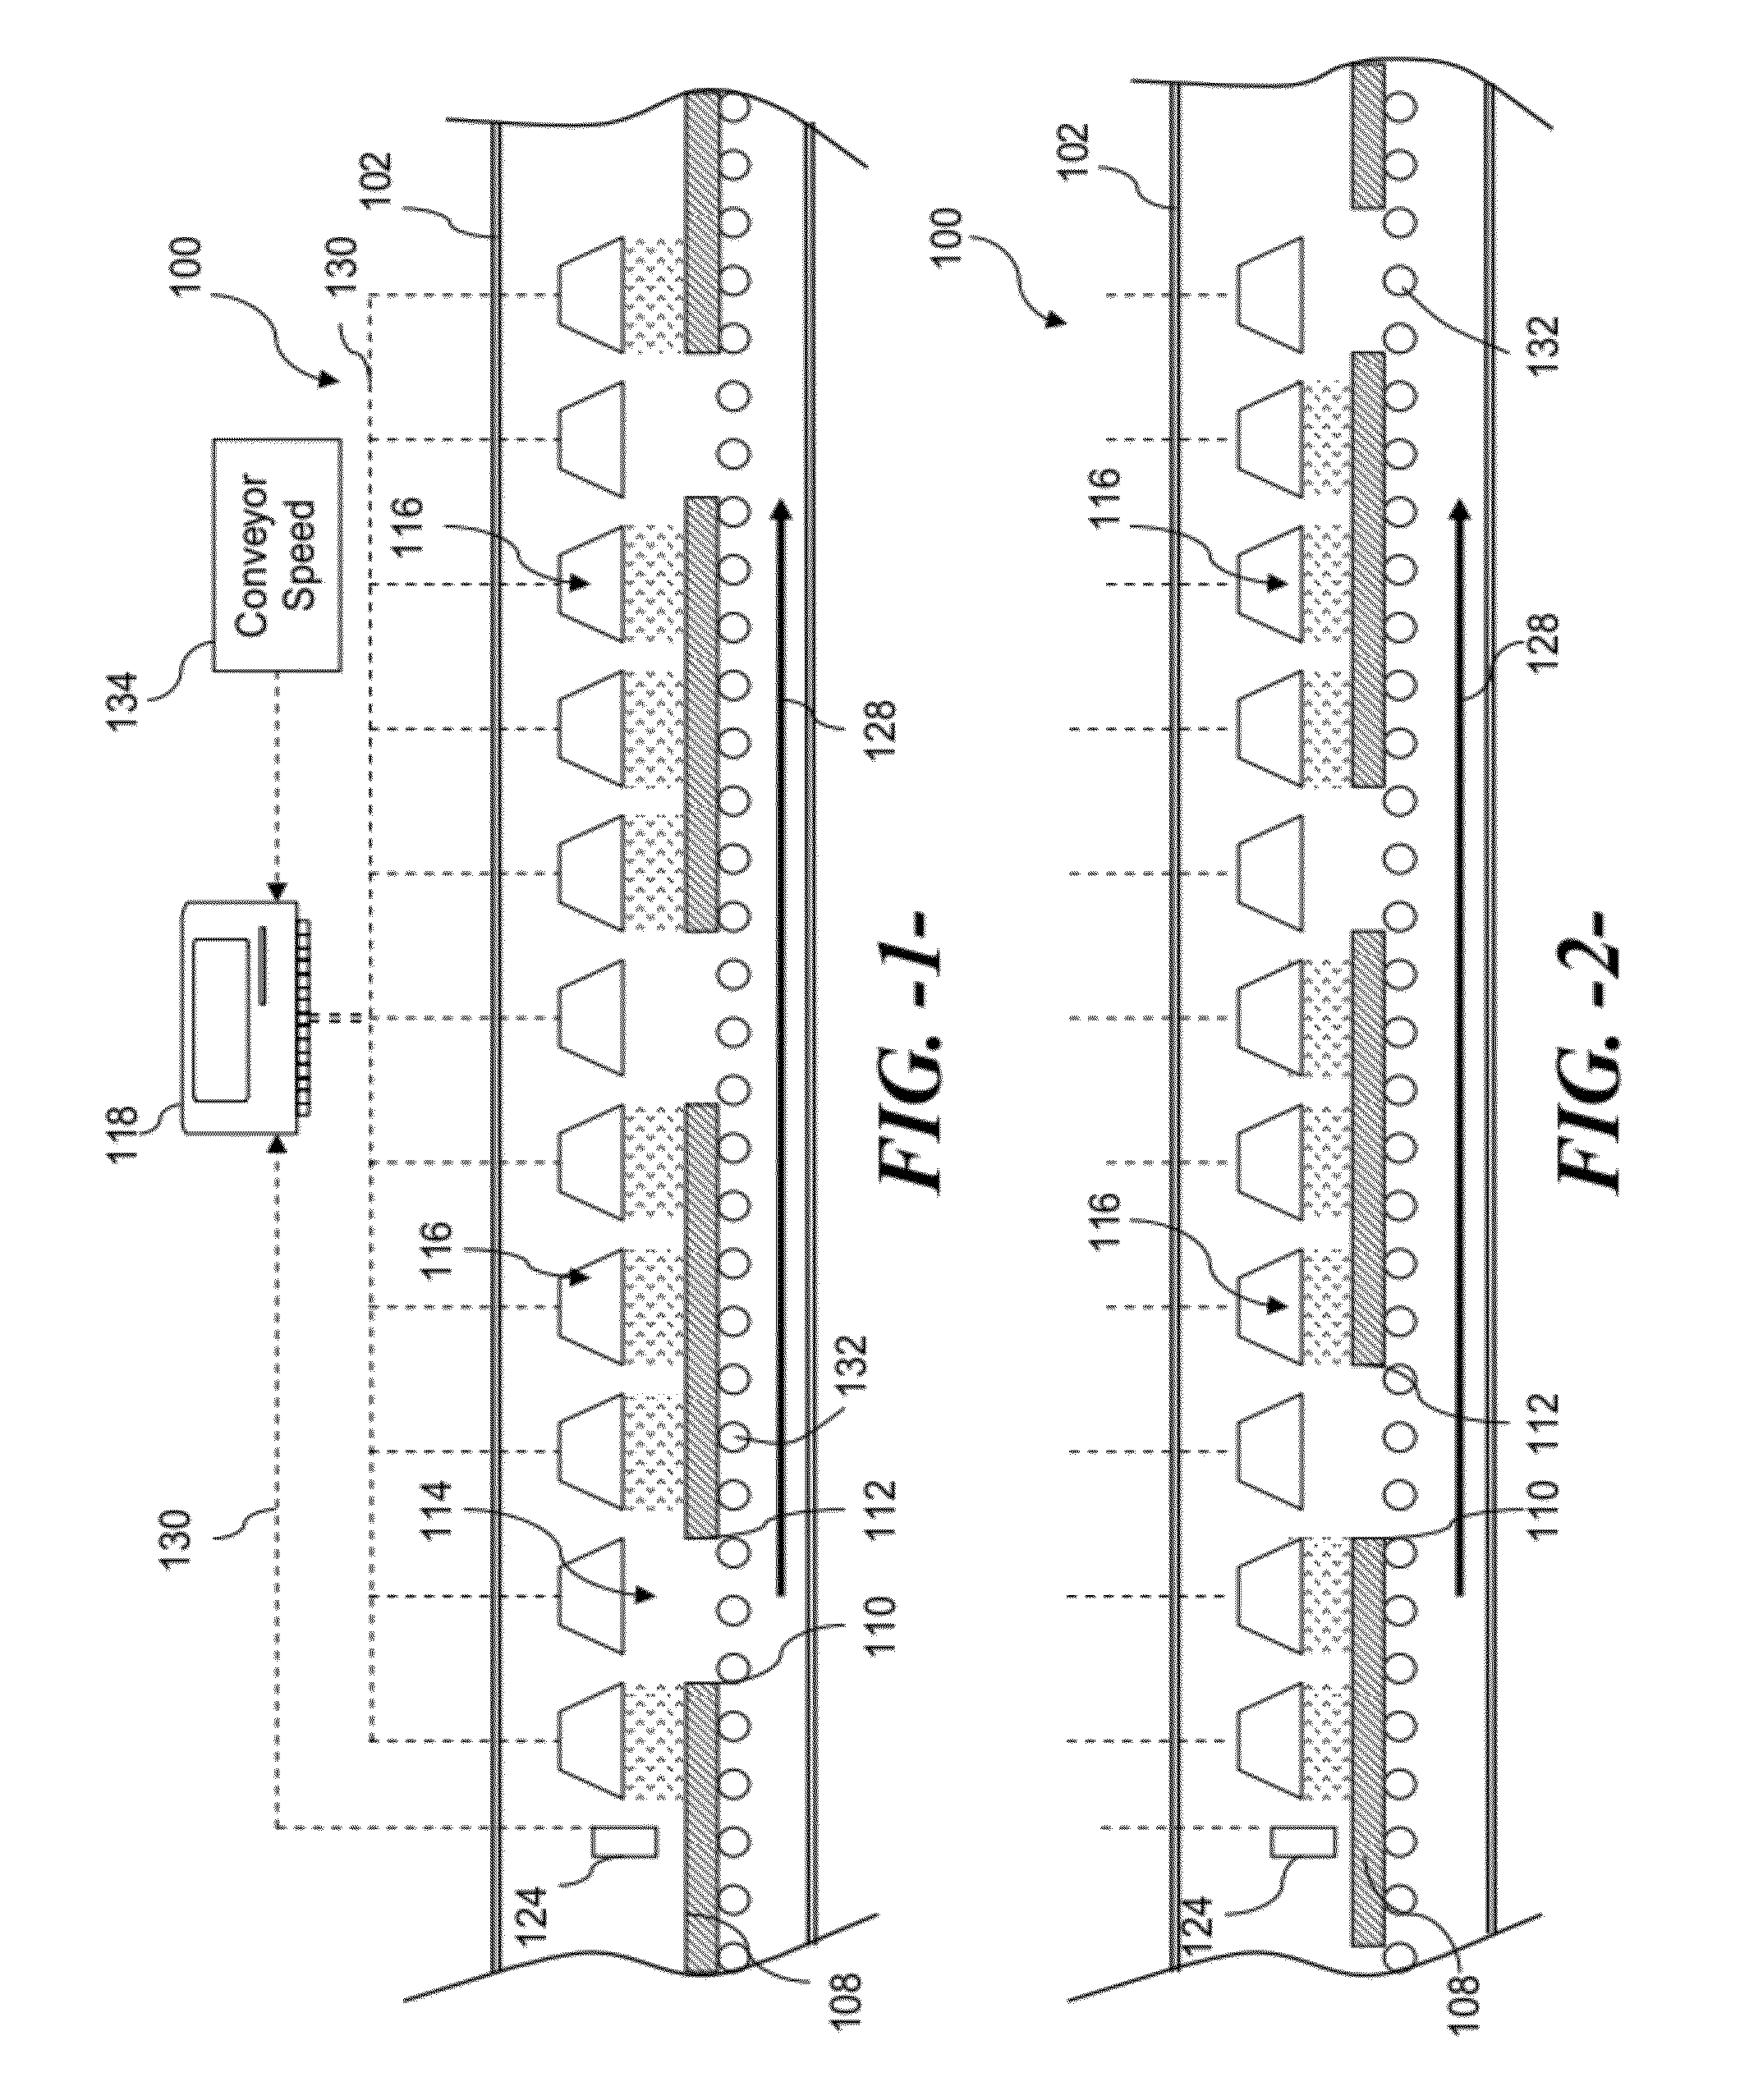 Dynamic system for variable heating or cooling of linearly conveyed substrates